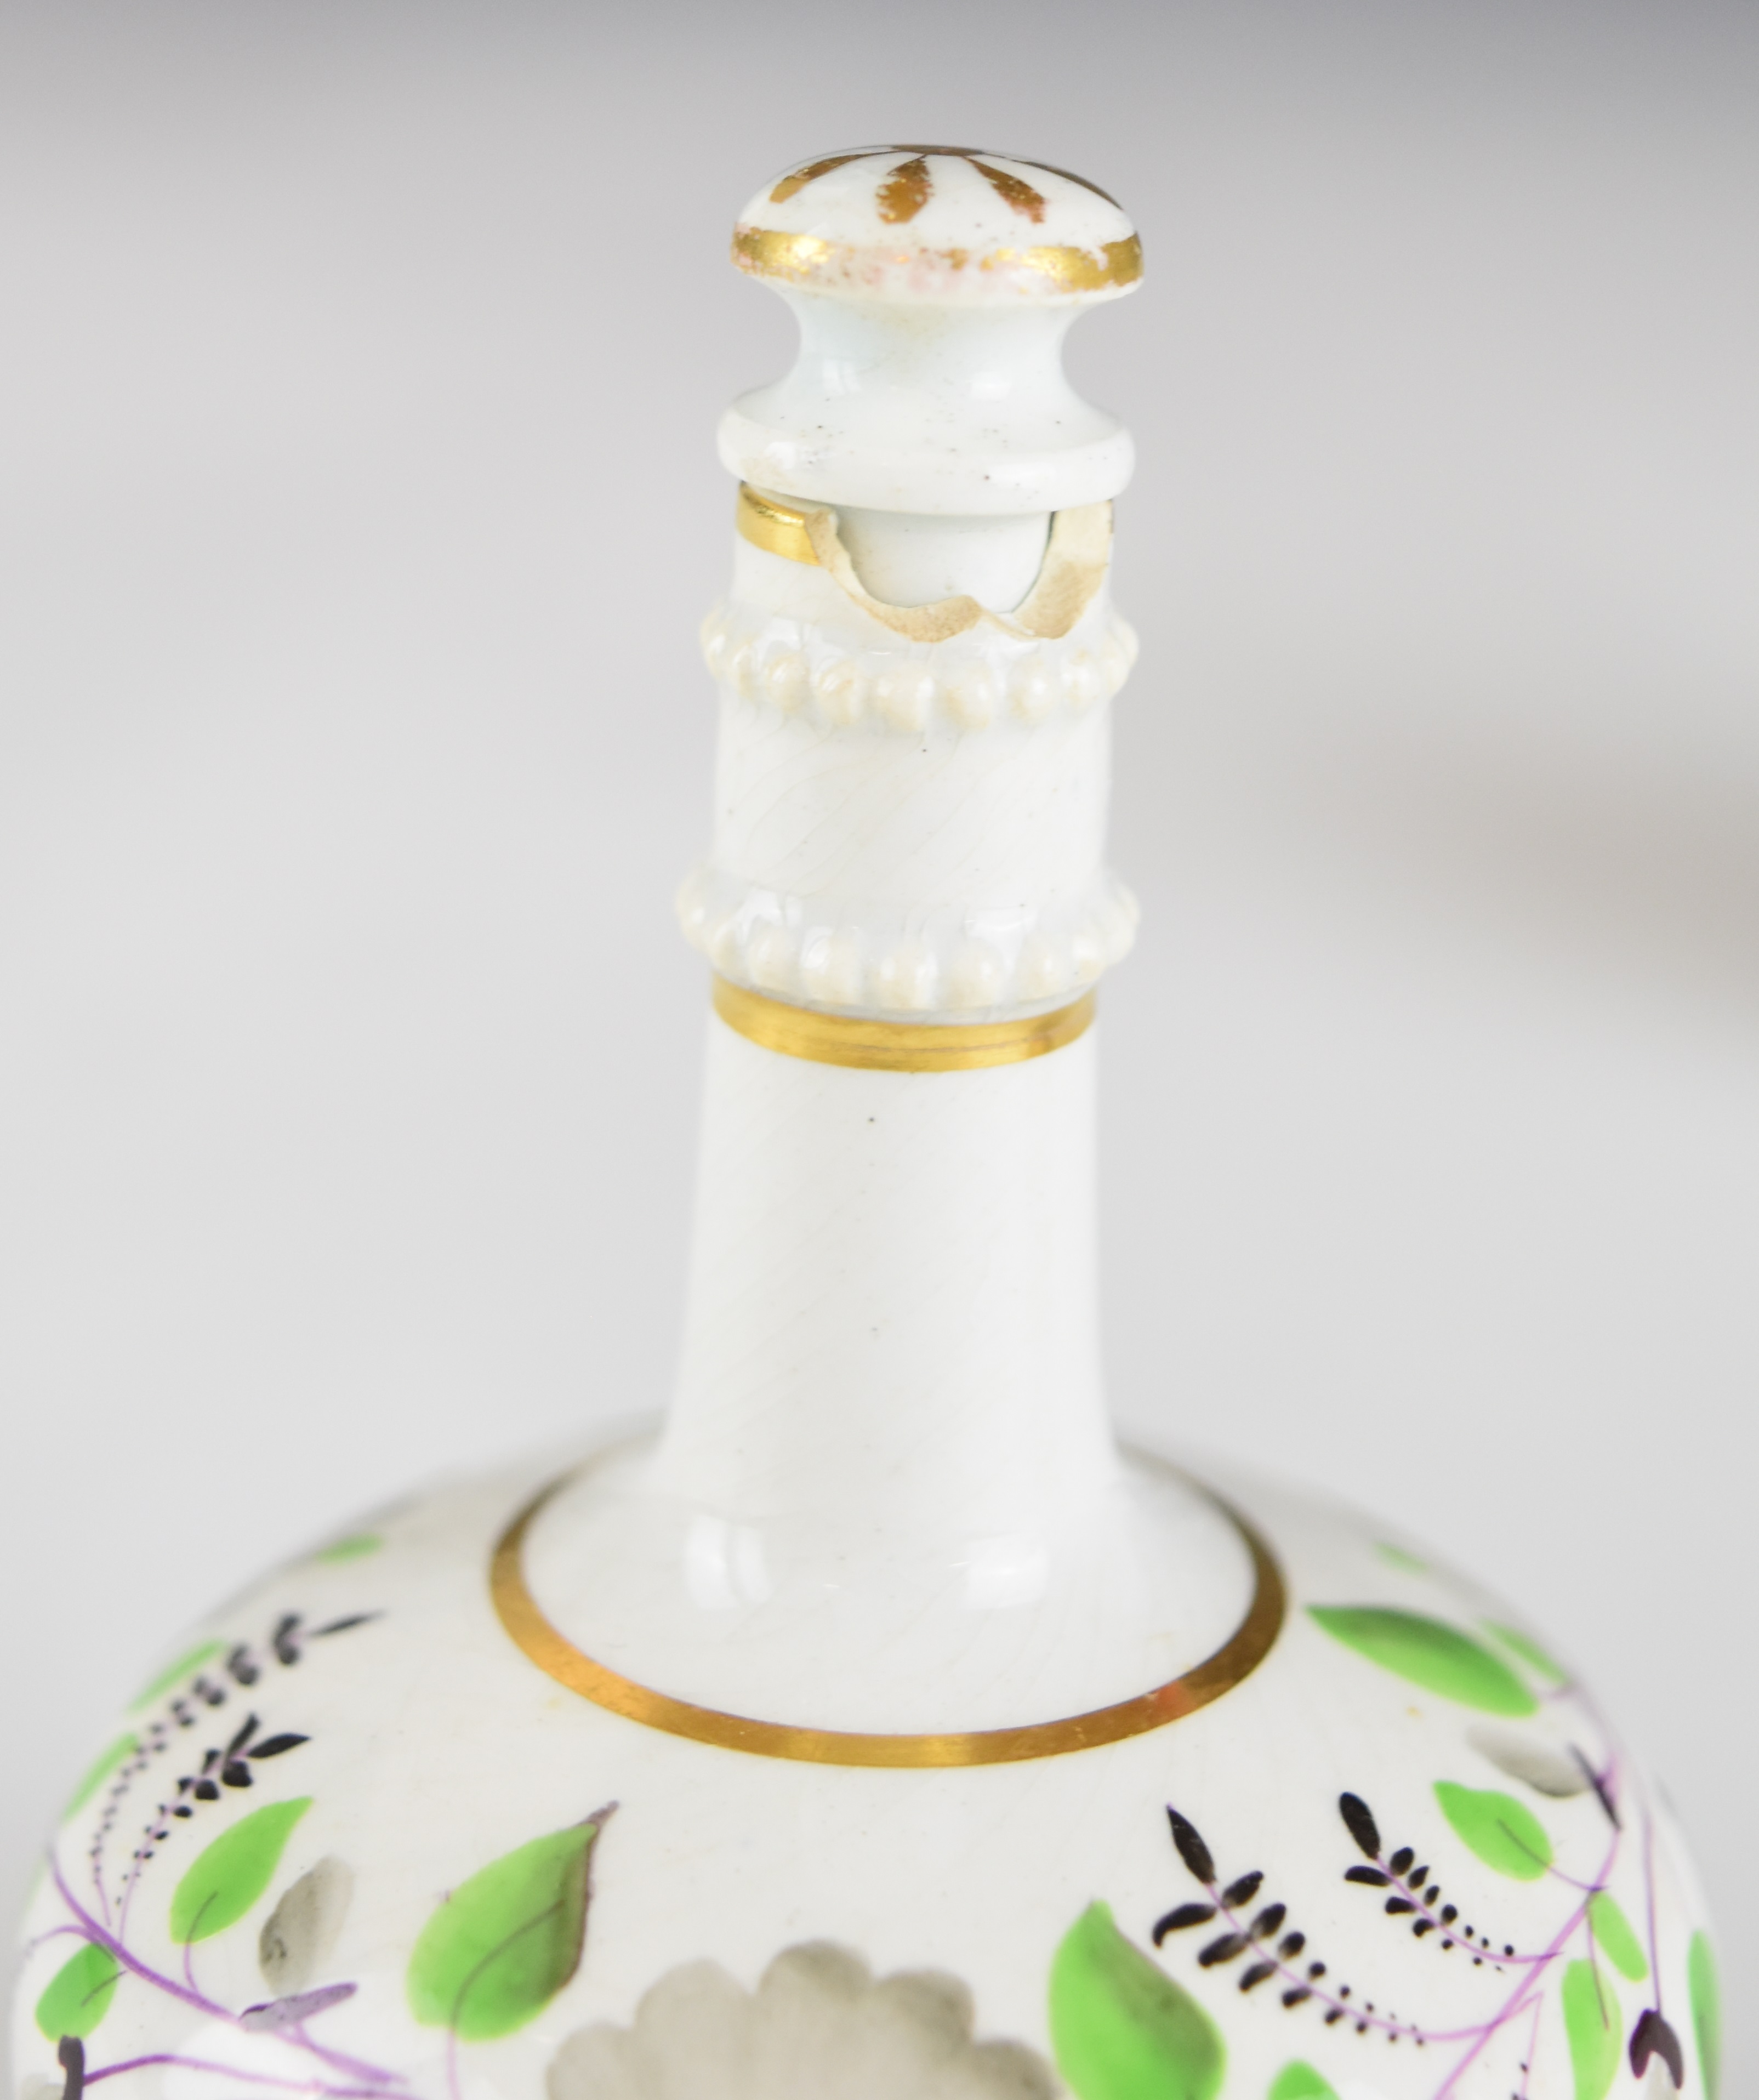 Crown Derby Imari and Davenport covered scent / perfume bottles, Coalport miniature jug with - Image 3 of 14